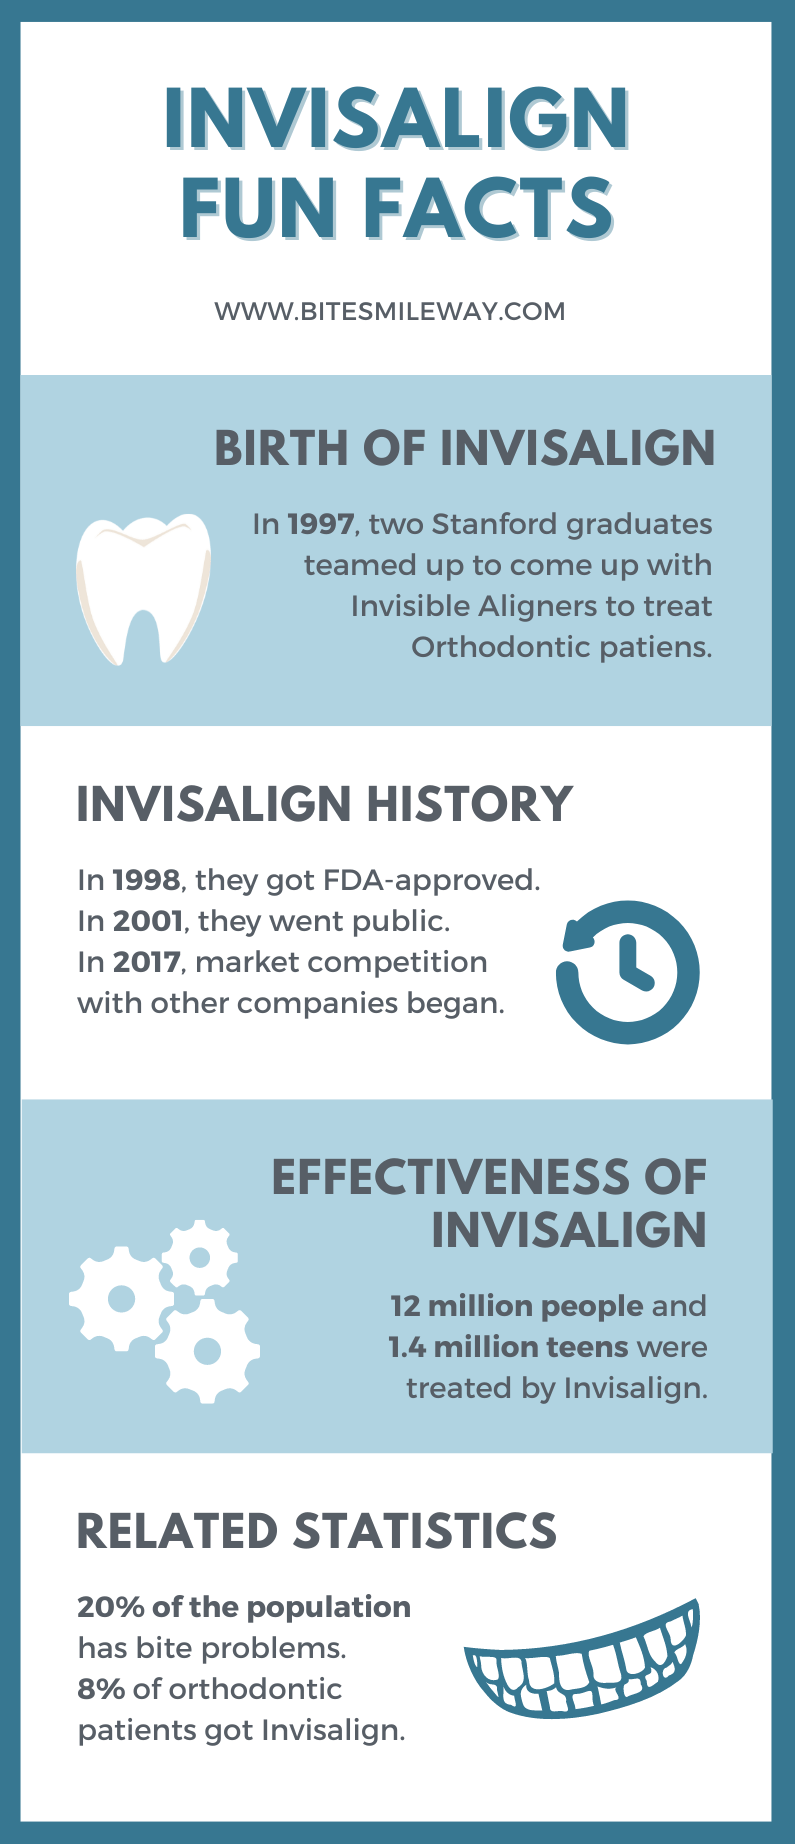 Fun Facts About Invisalign